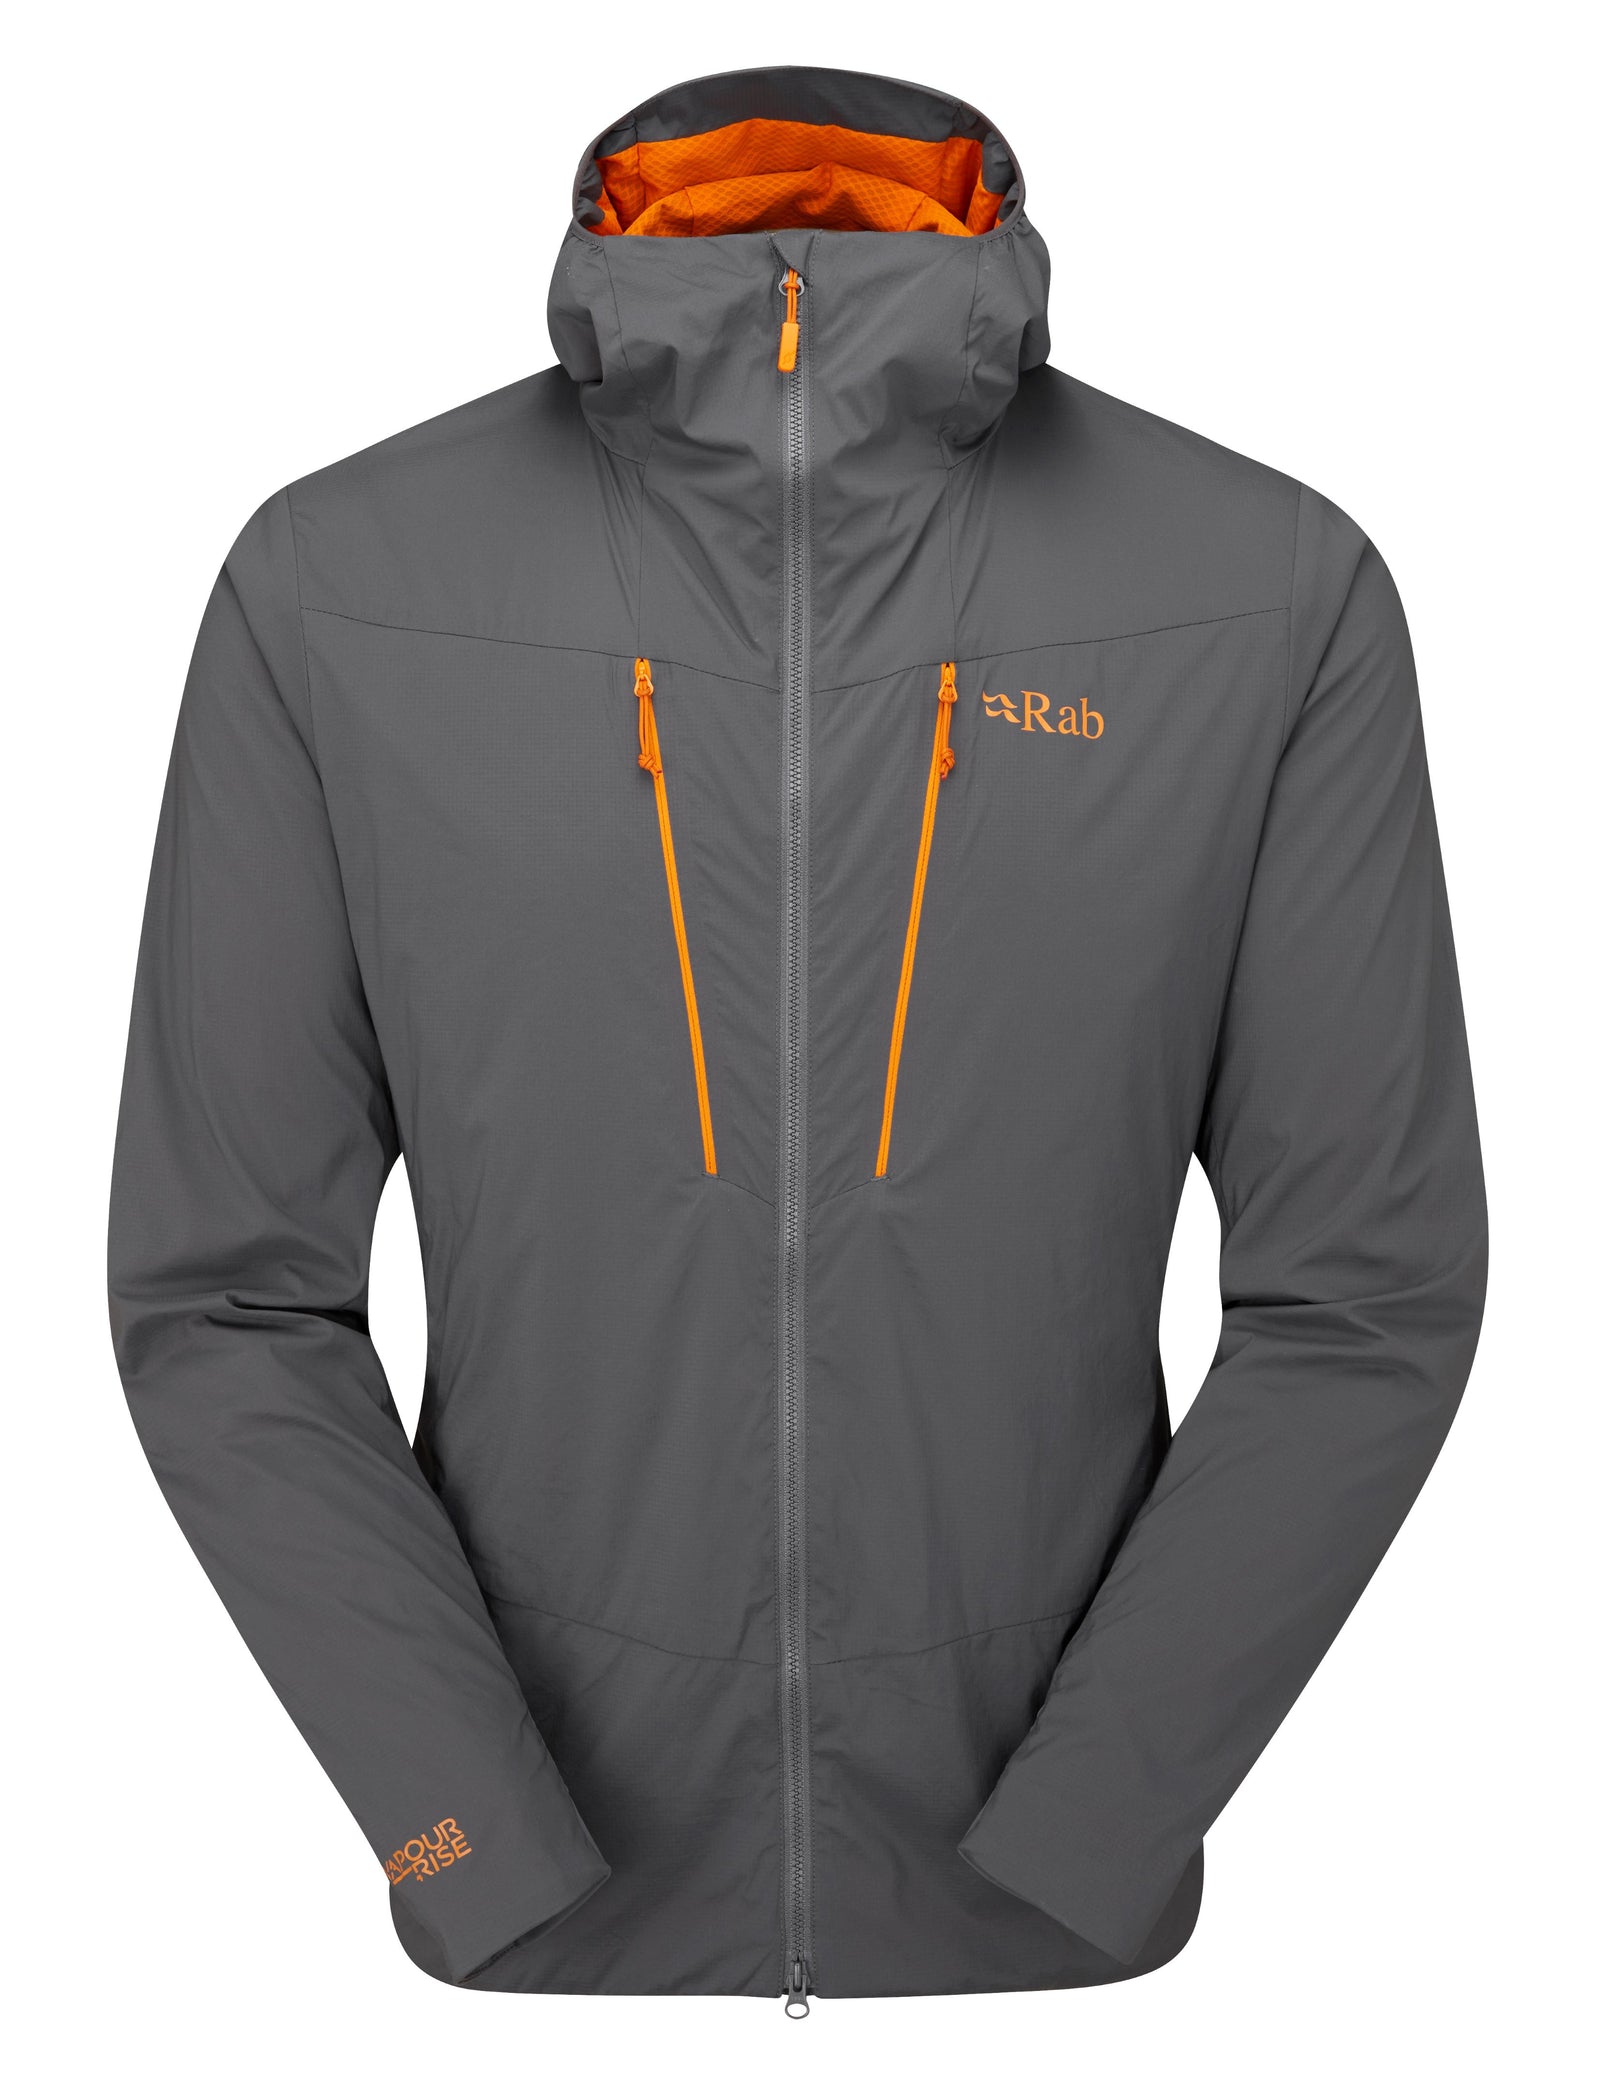 Shop Rab Clothing & Equipment Online from Outfitters